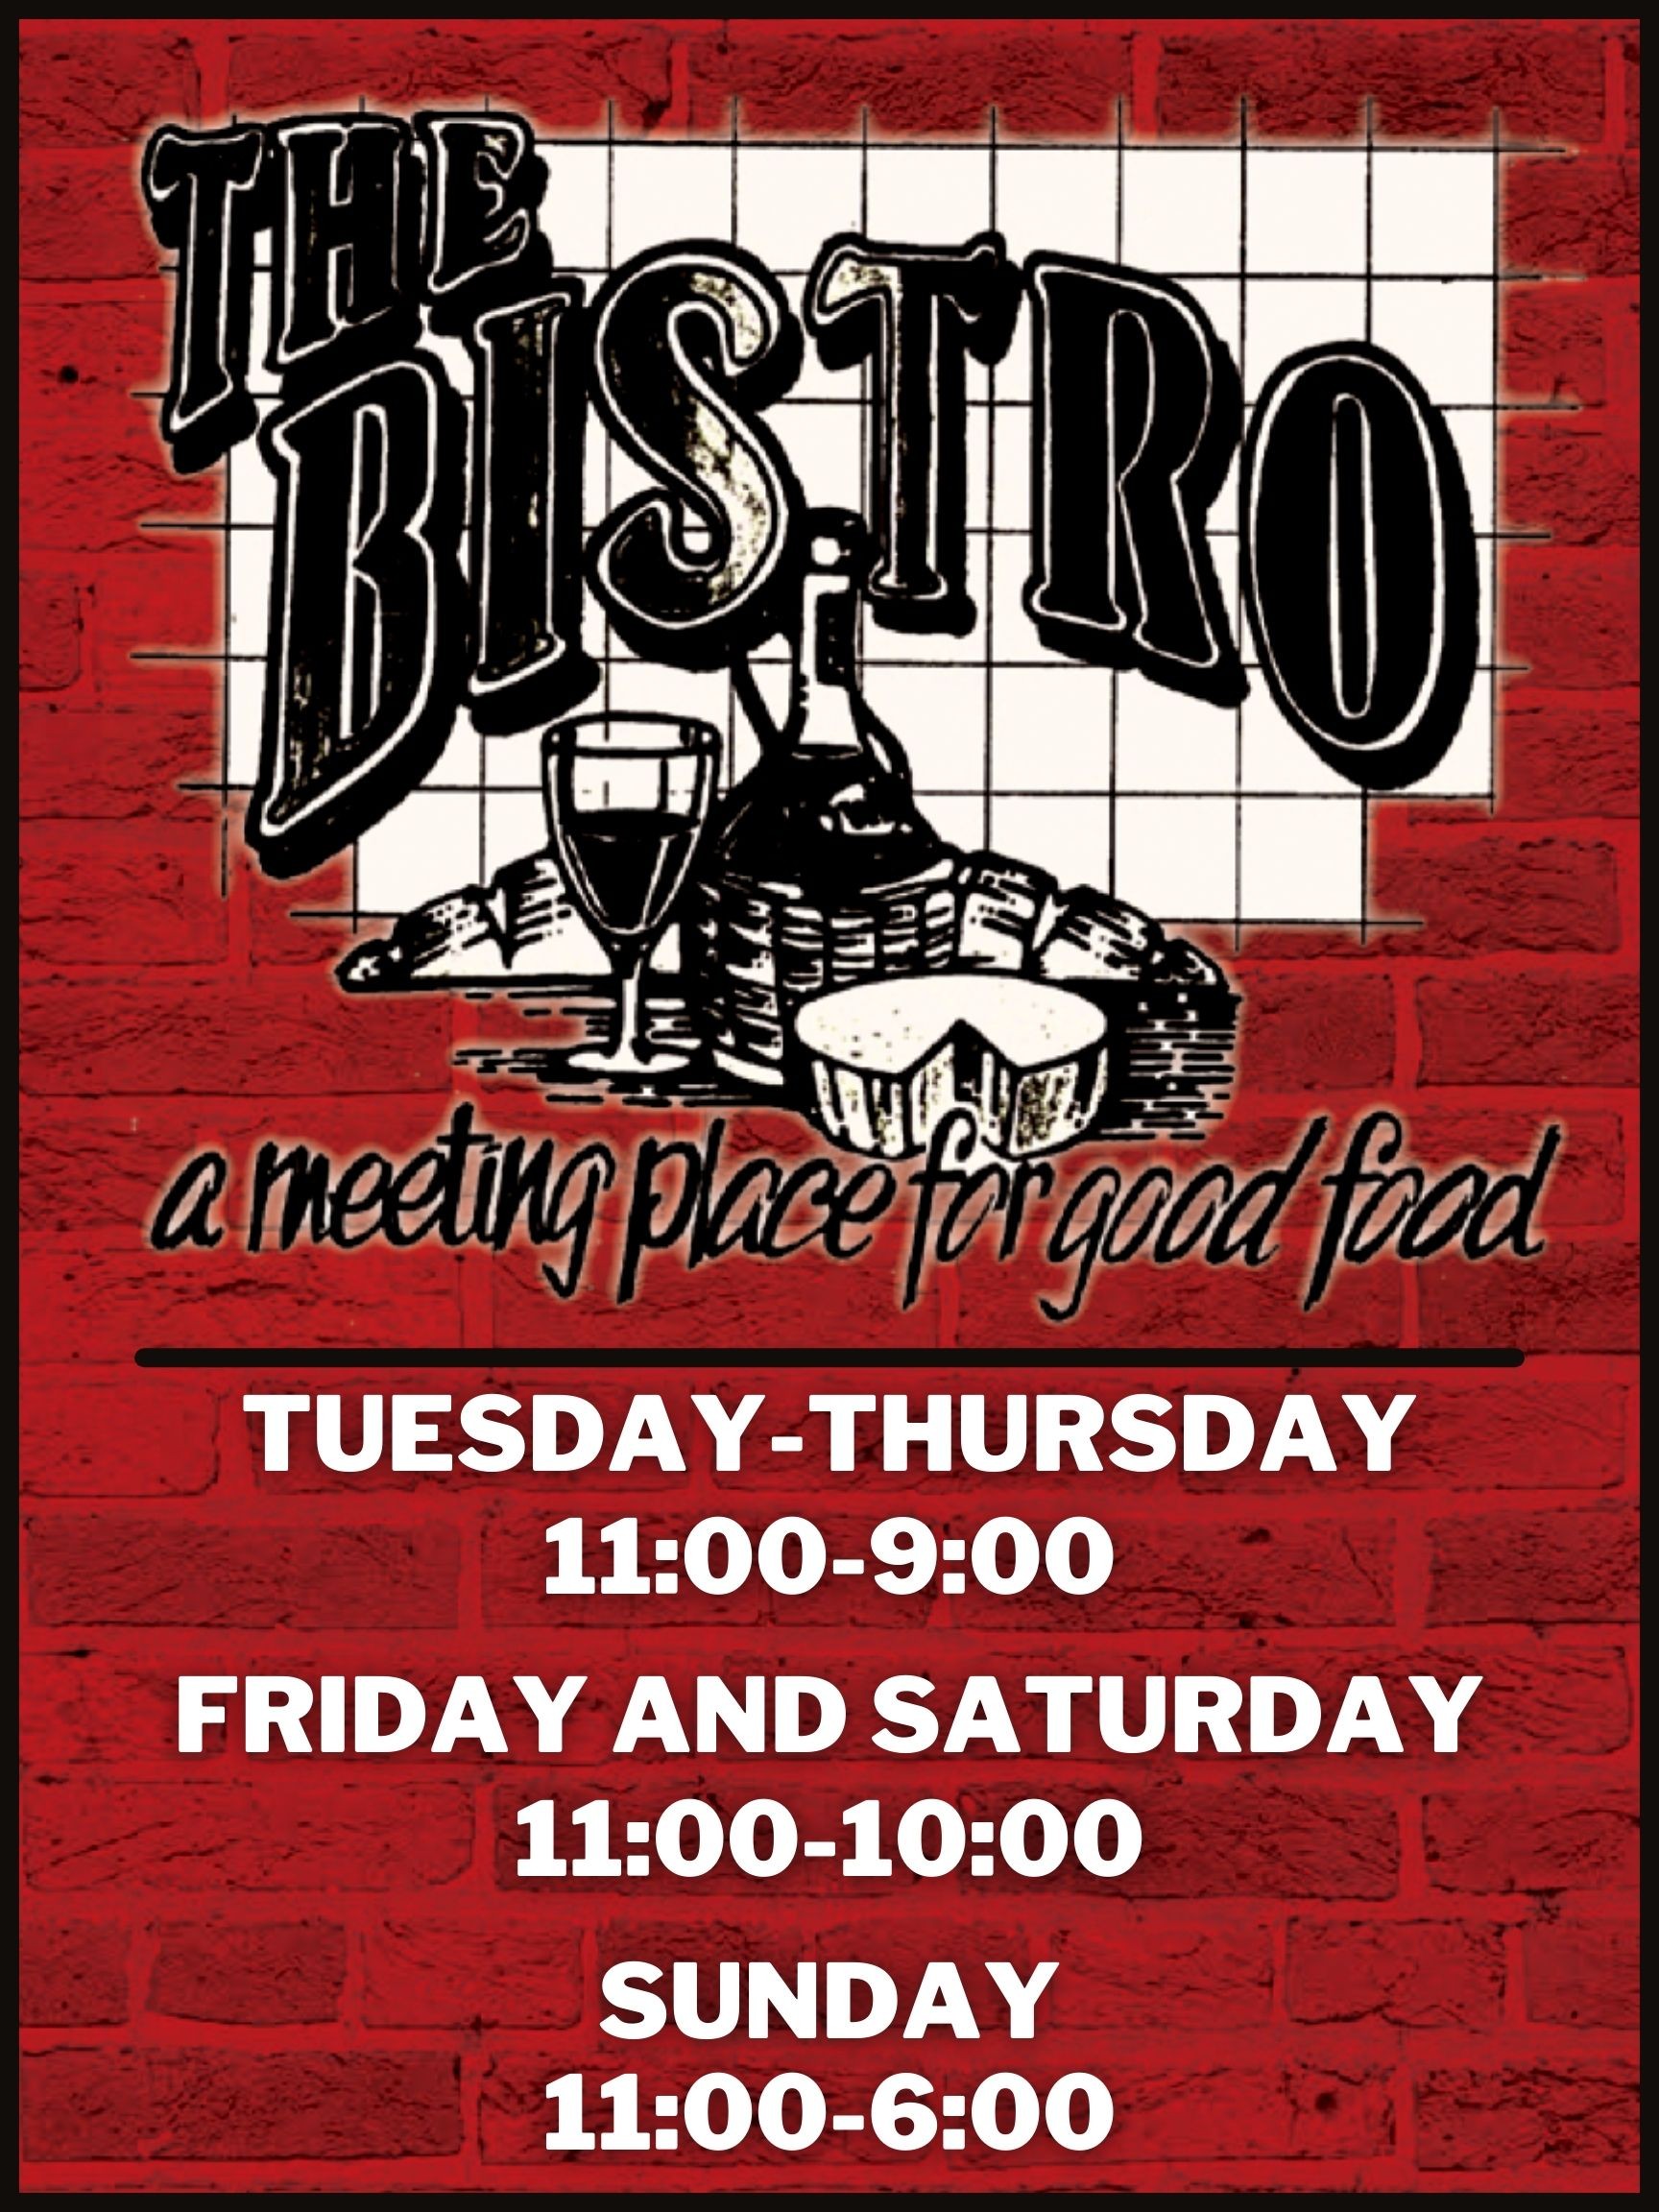 The Bistro - Johnstown 203 Nees Ave